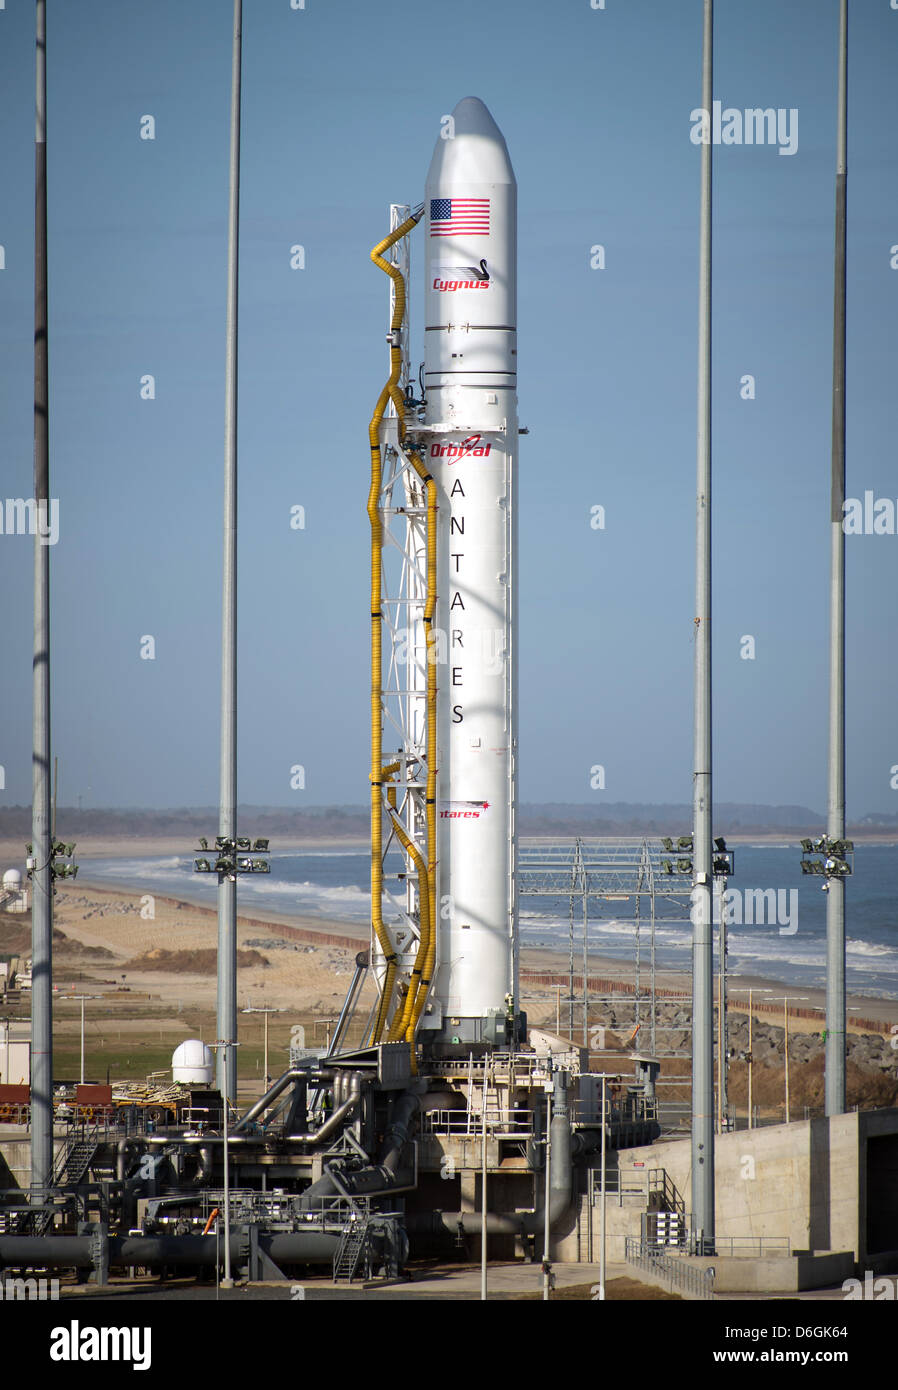 Orbital Sciences Corporation Antares rocket is seen on the Mid-Atlantic Regional Spaceport Pad-0A at the NASA Wallops Flight Facility Wallops, Virginia, USA. April 16, 2013. Orbital Sciences Corporation is hoping to become the second commercial operator for rockets to resupply the International Space. Stock Photo